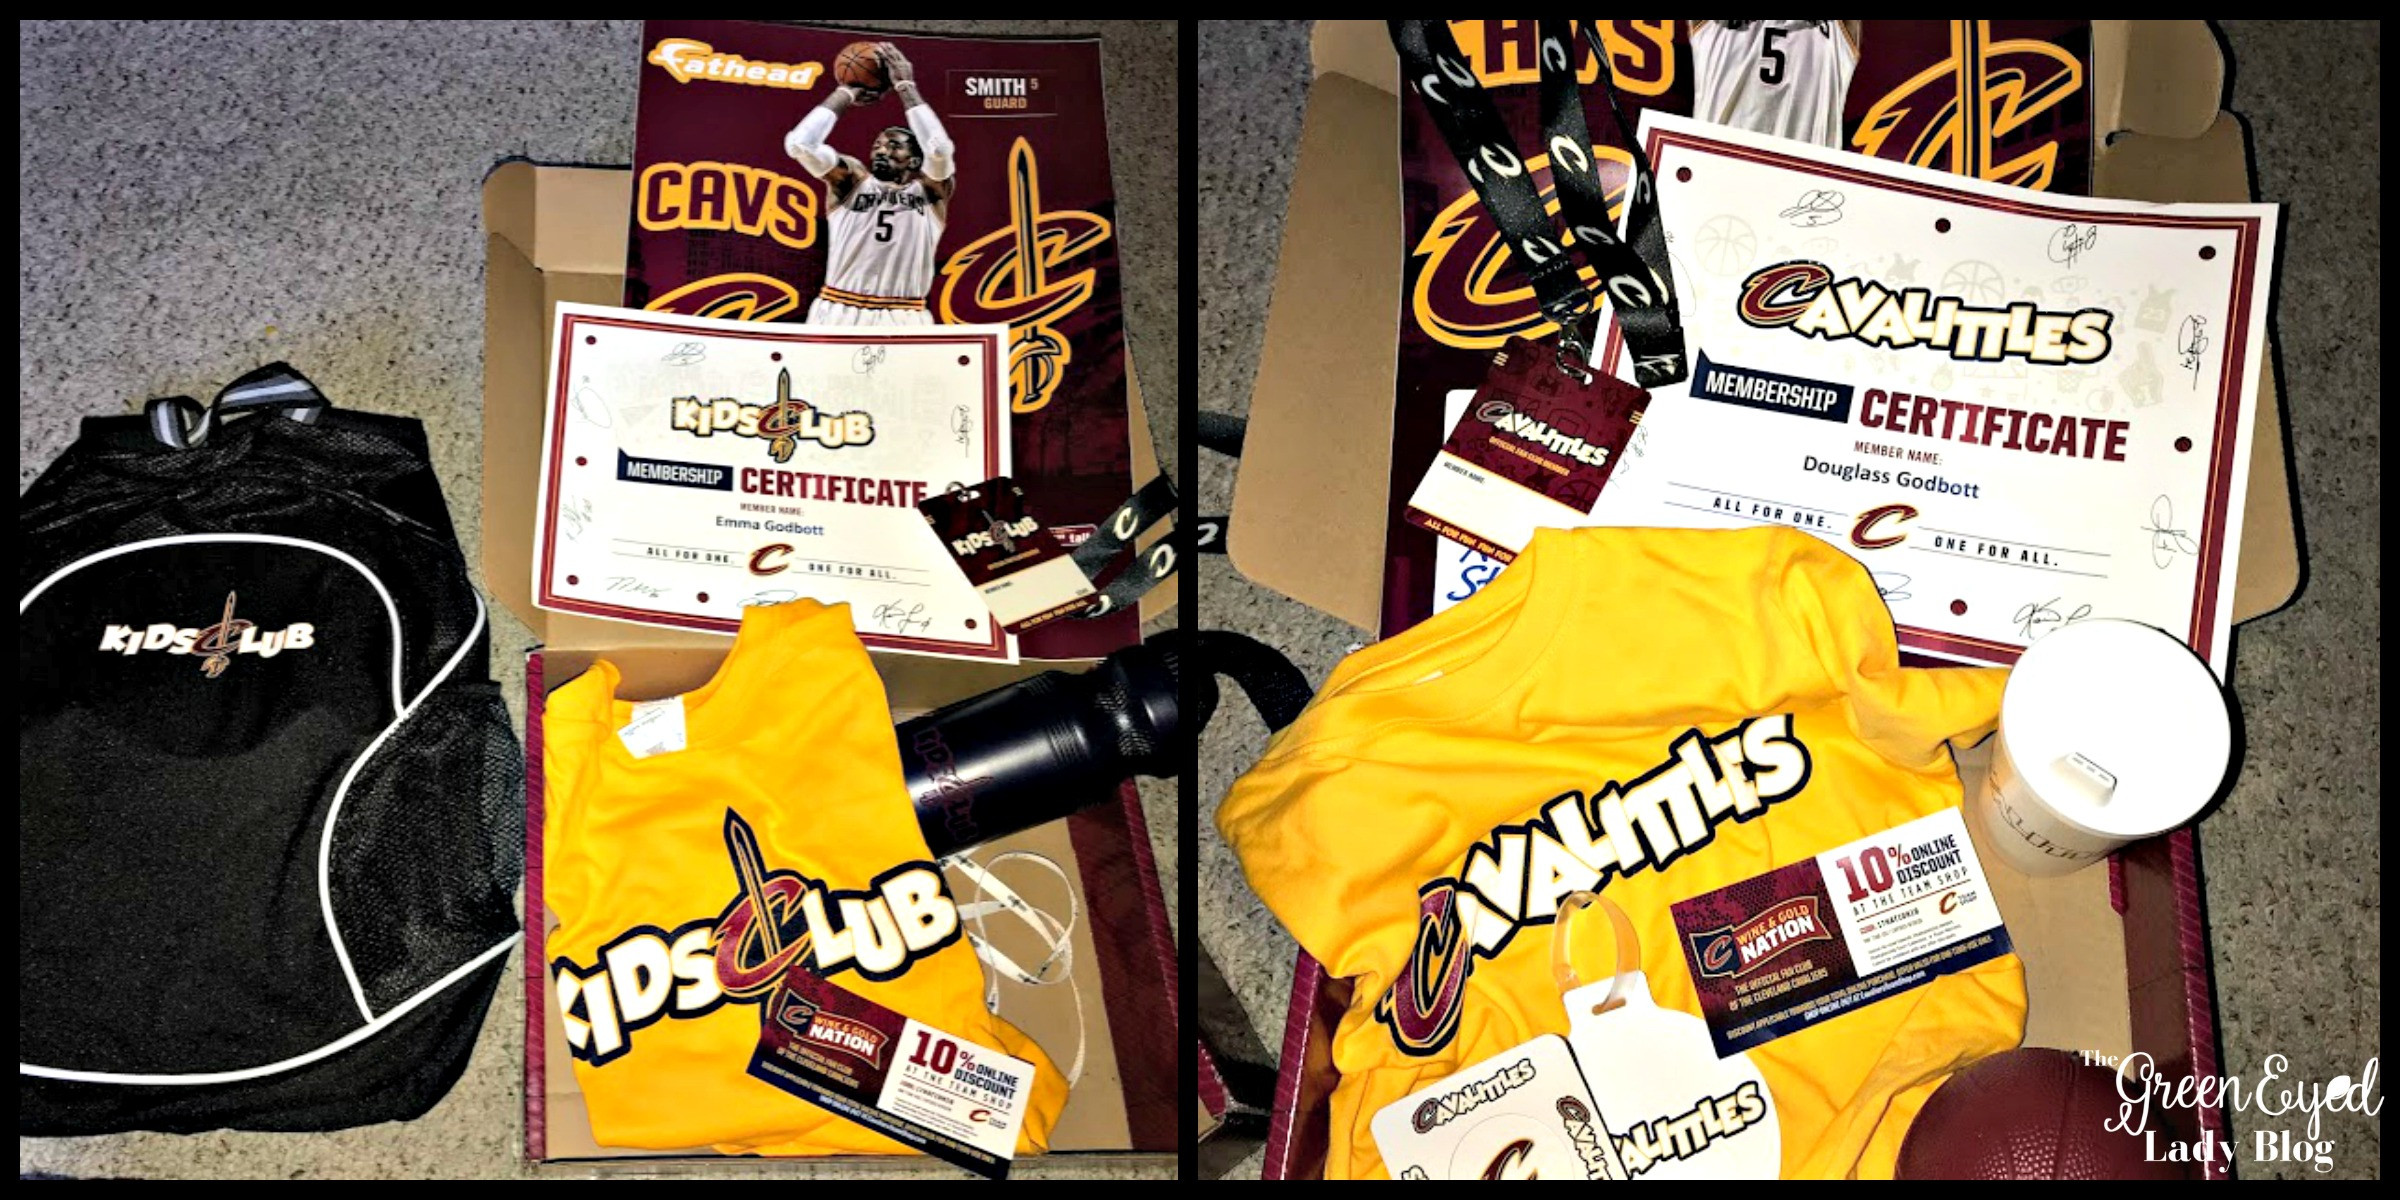 Cavs Halloween Cookies
 CAVS Wine & Gold Nation ly Treats The Green Eyed